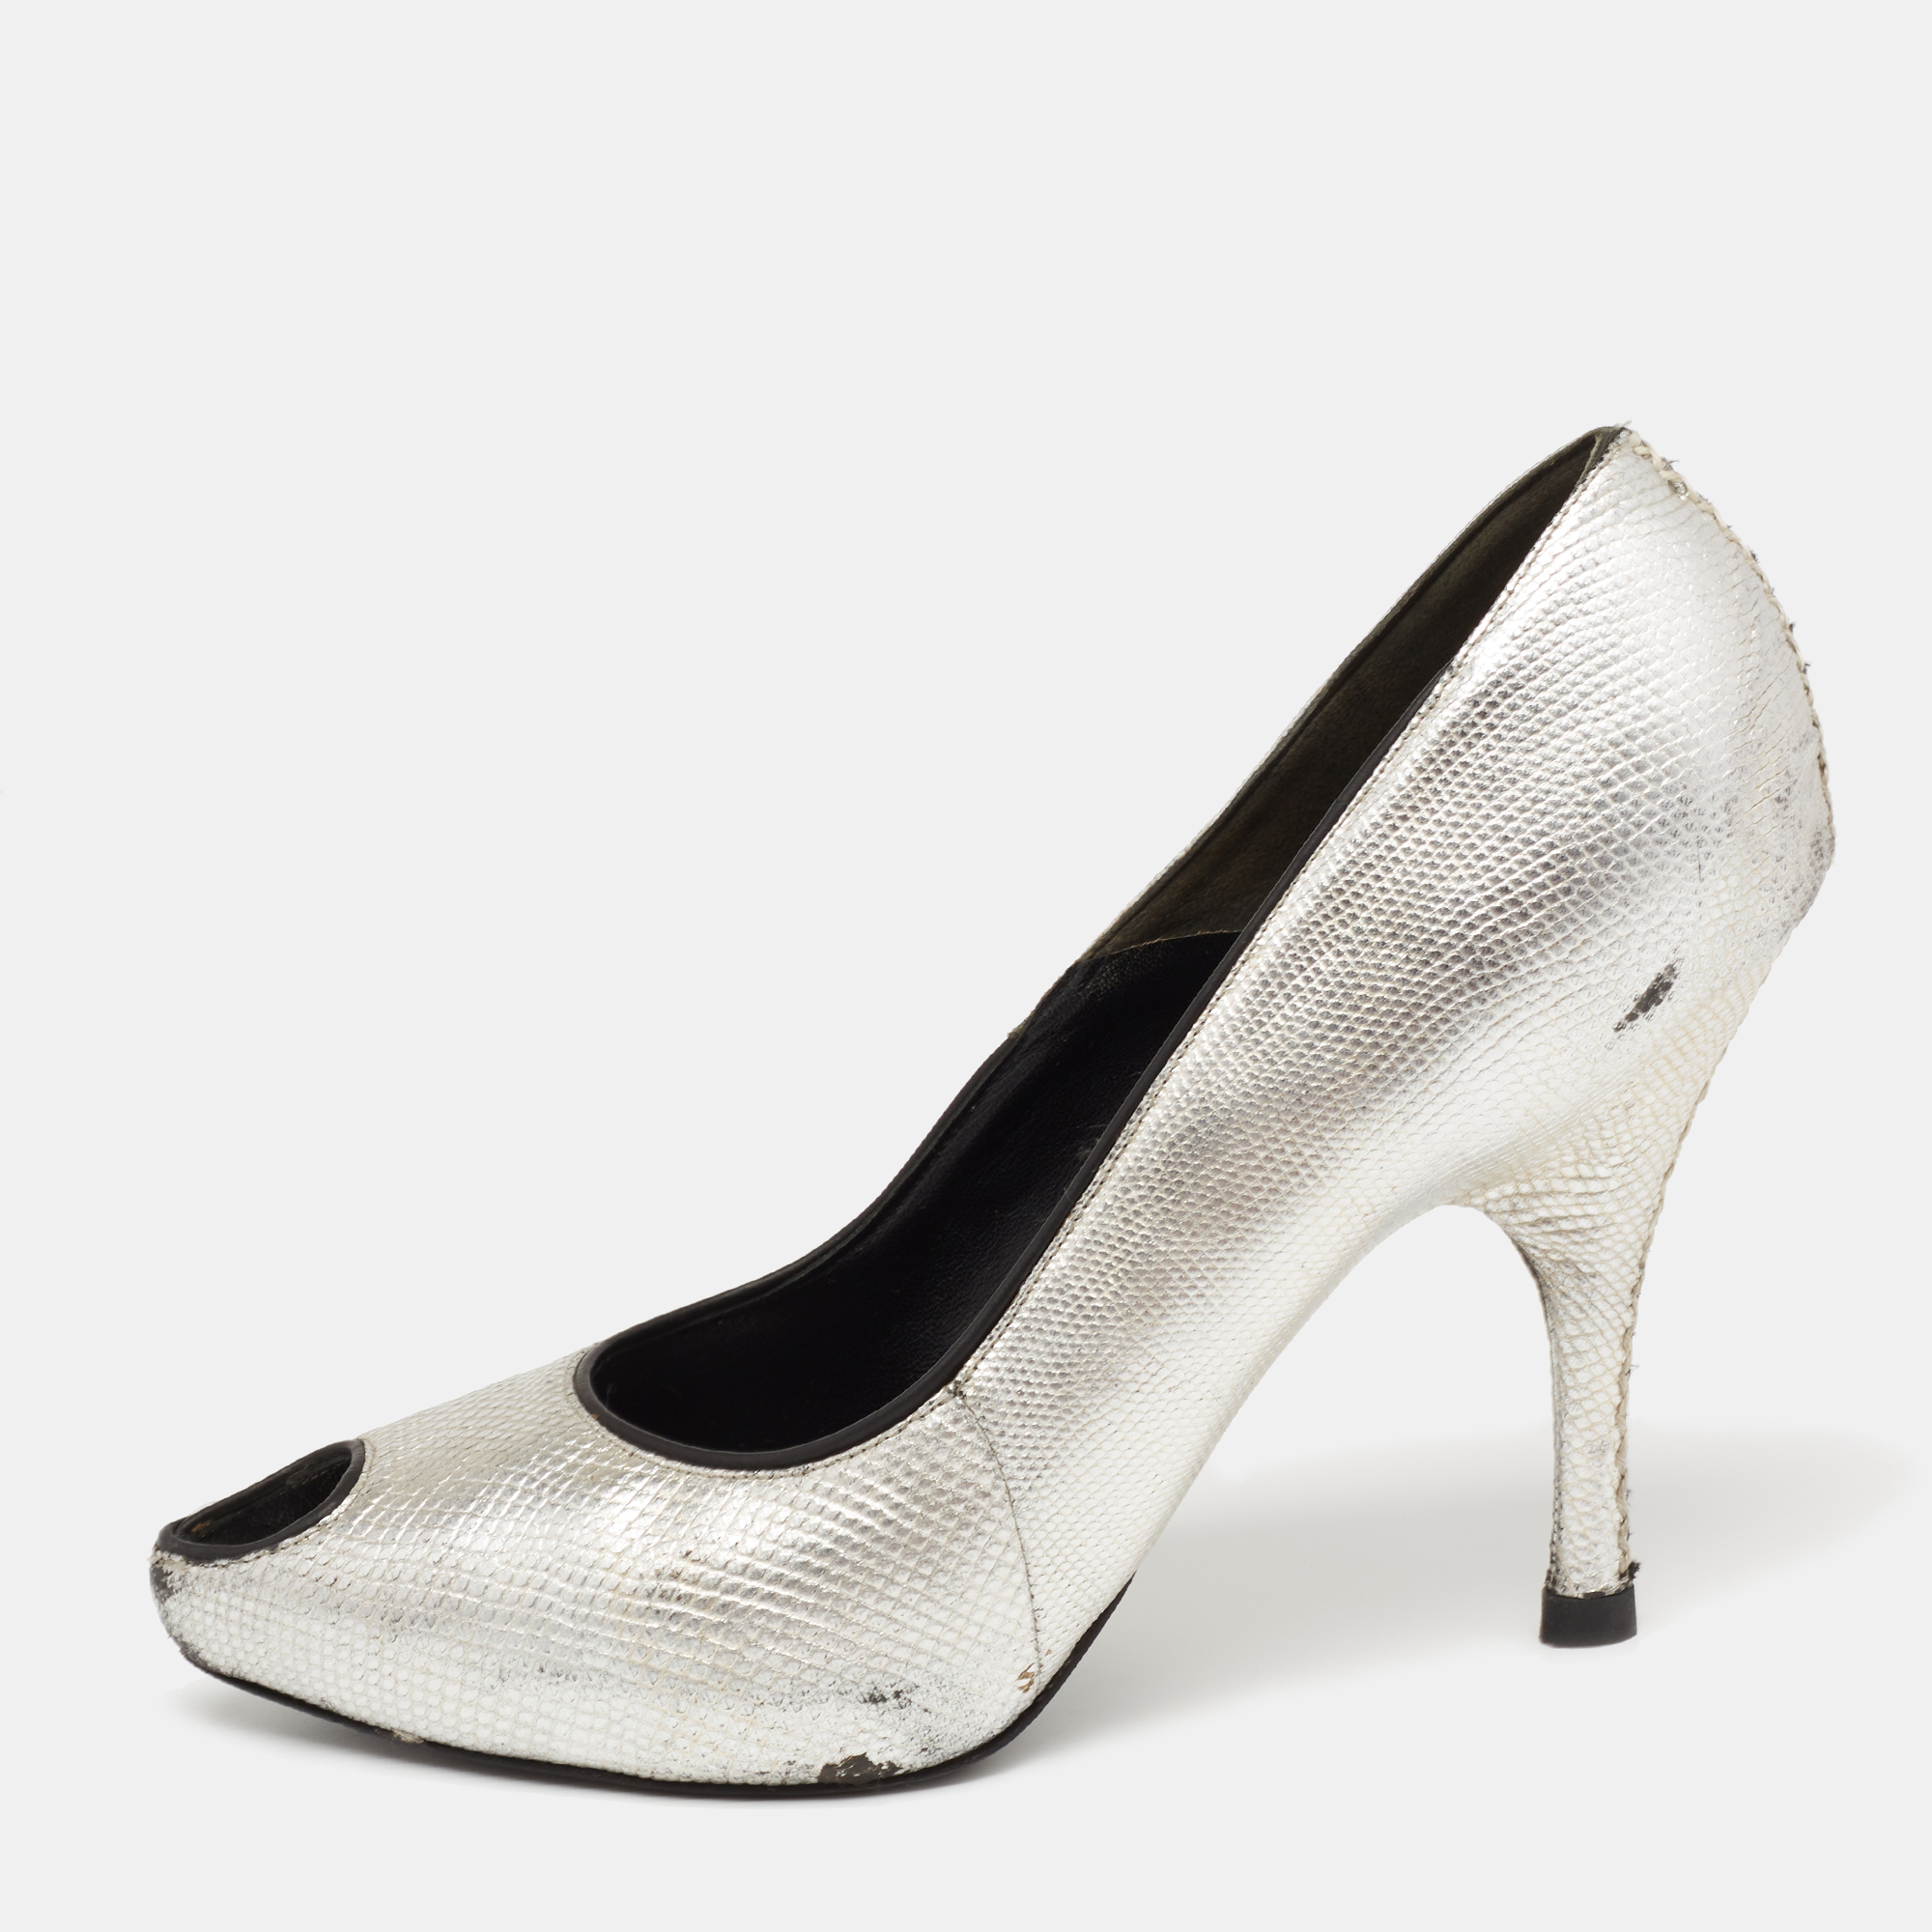 Pre-owned Alexander Mcqueen Silver Lizard Embossed Leather Peep-toe Pumps Size 37.5